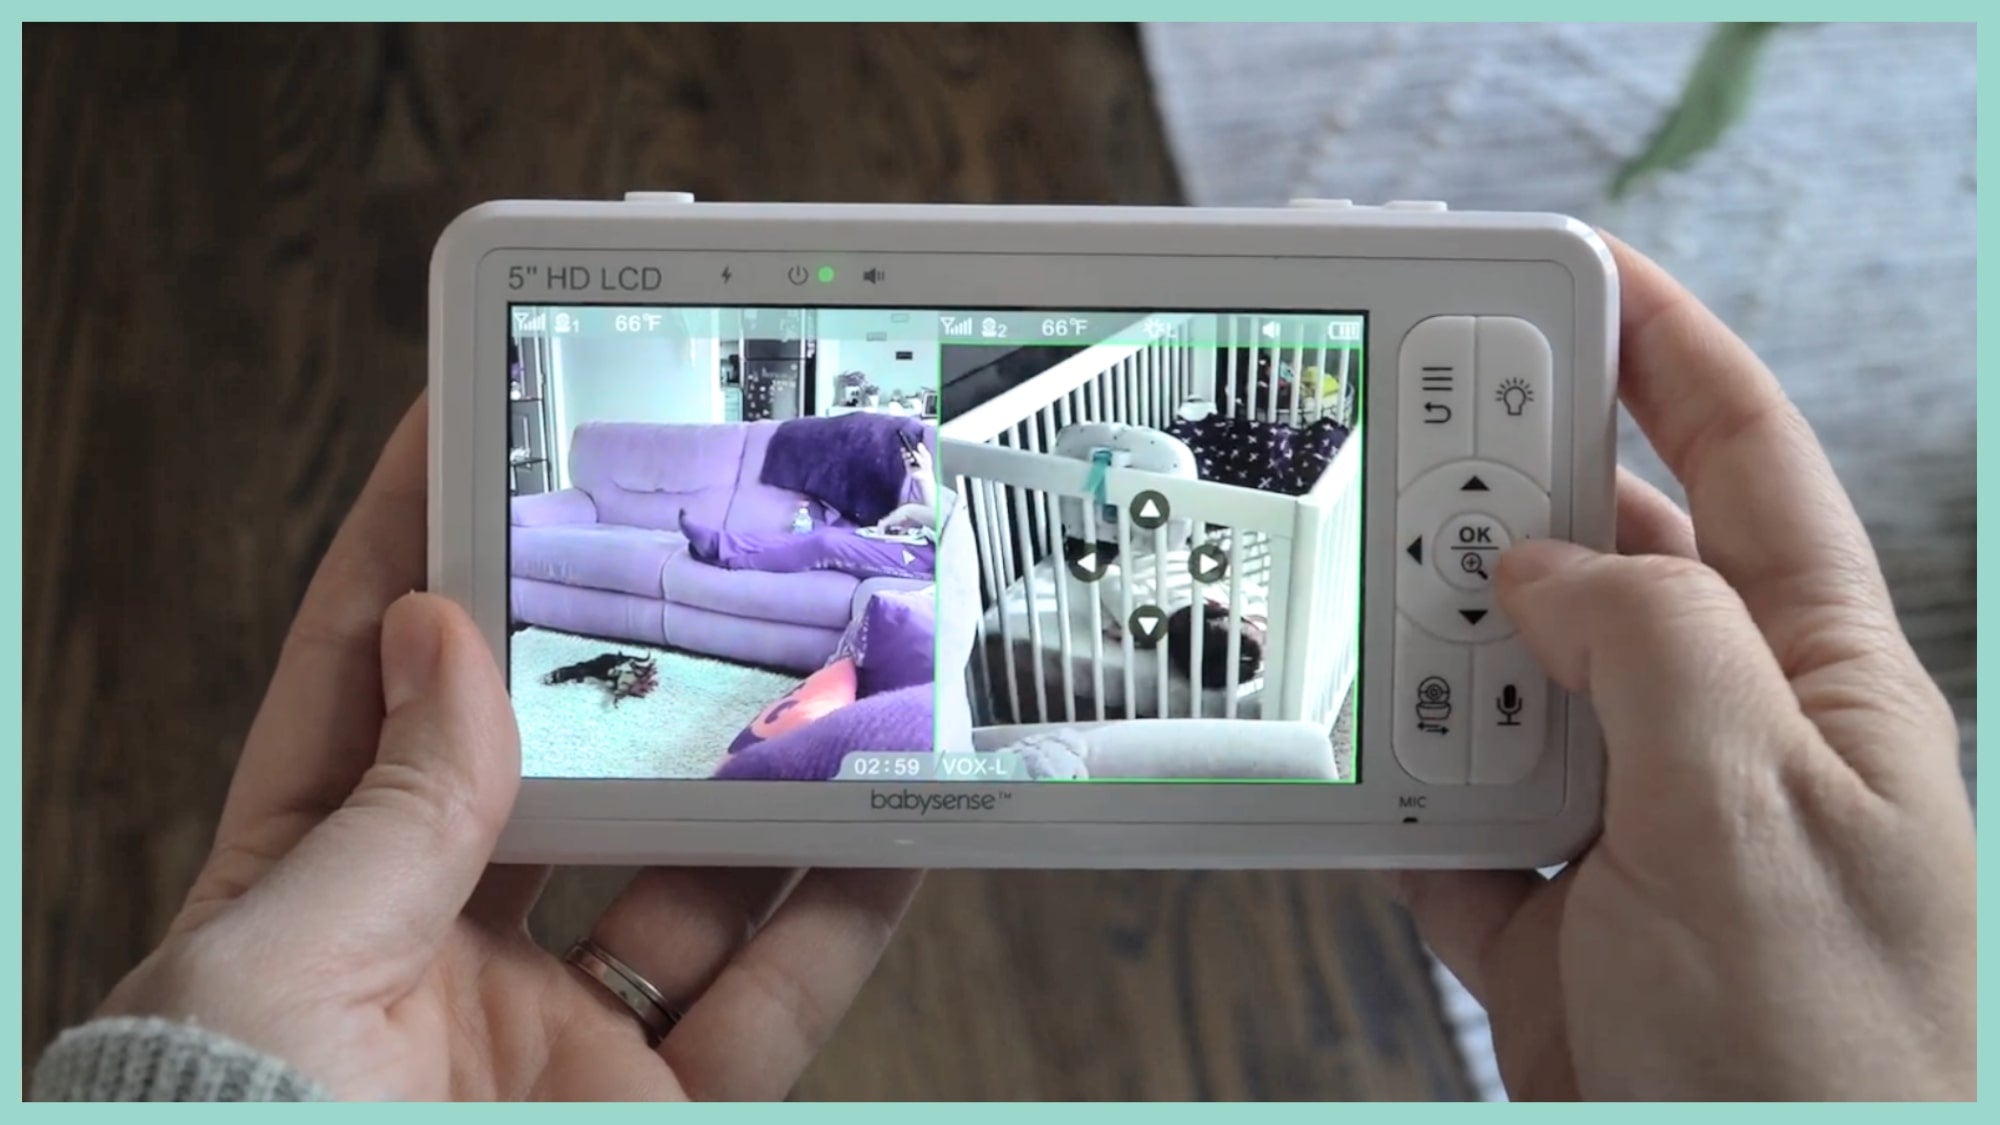 Add-On Camera for Video Baby Monitor HD S2